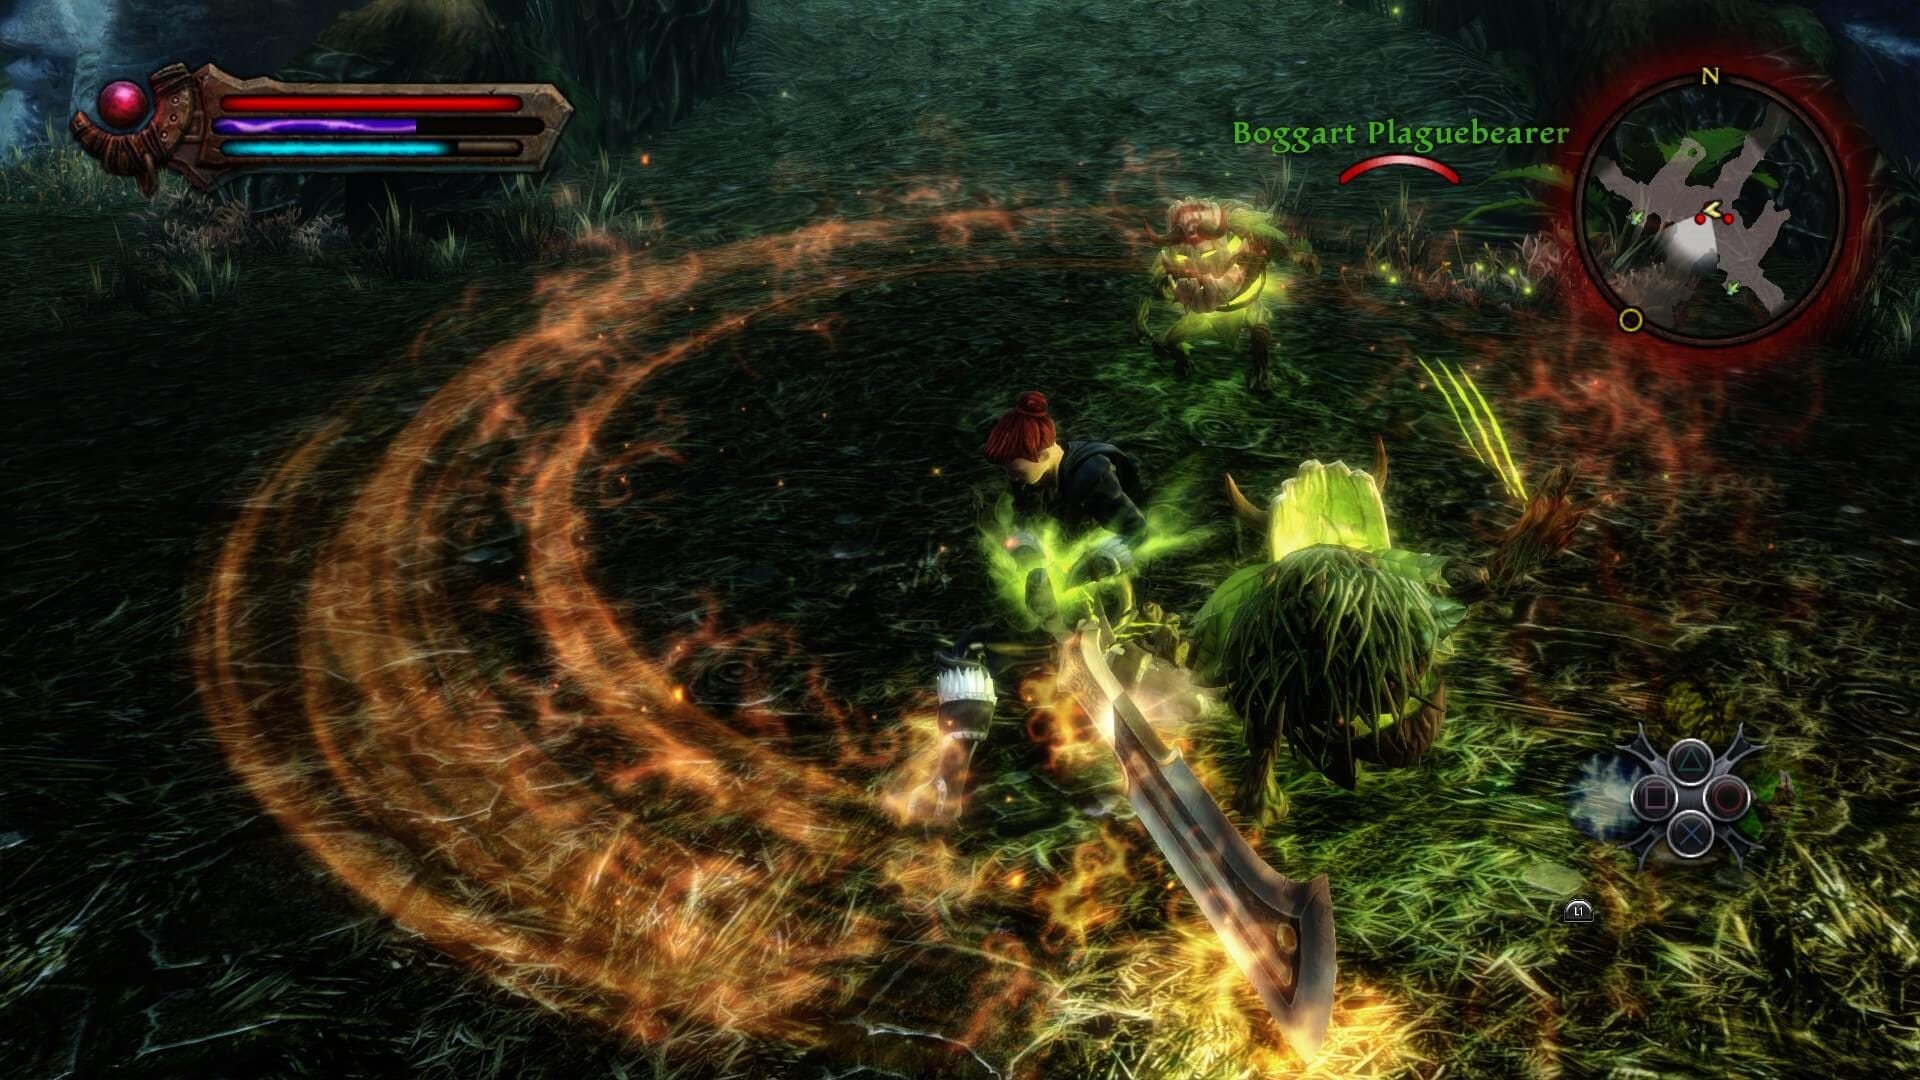 A character can be seen attacking some enemies.